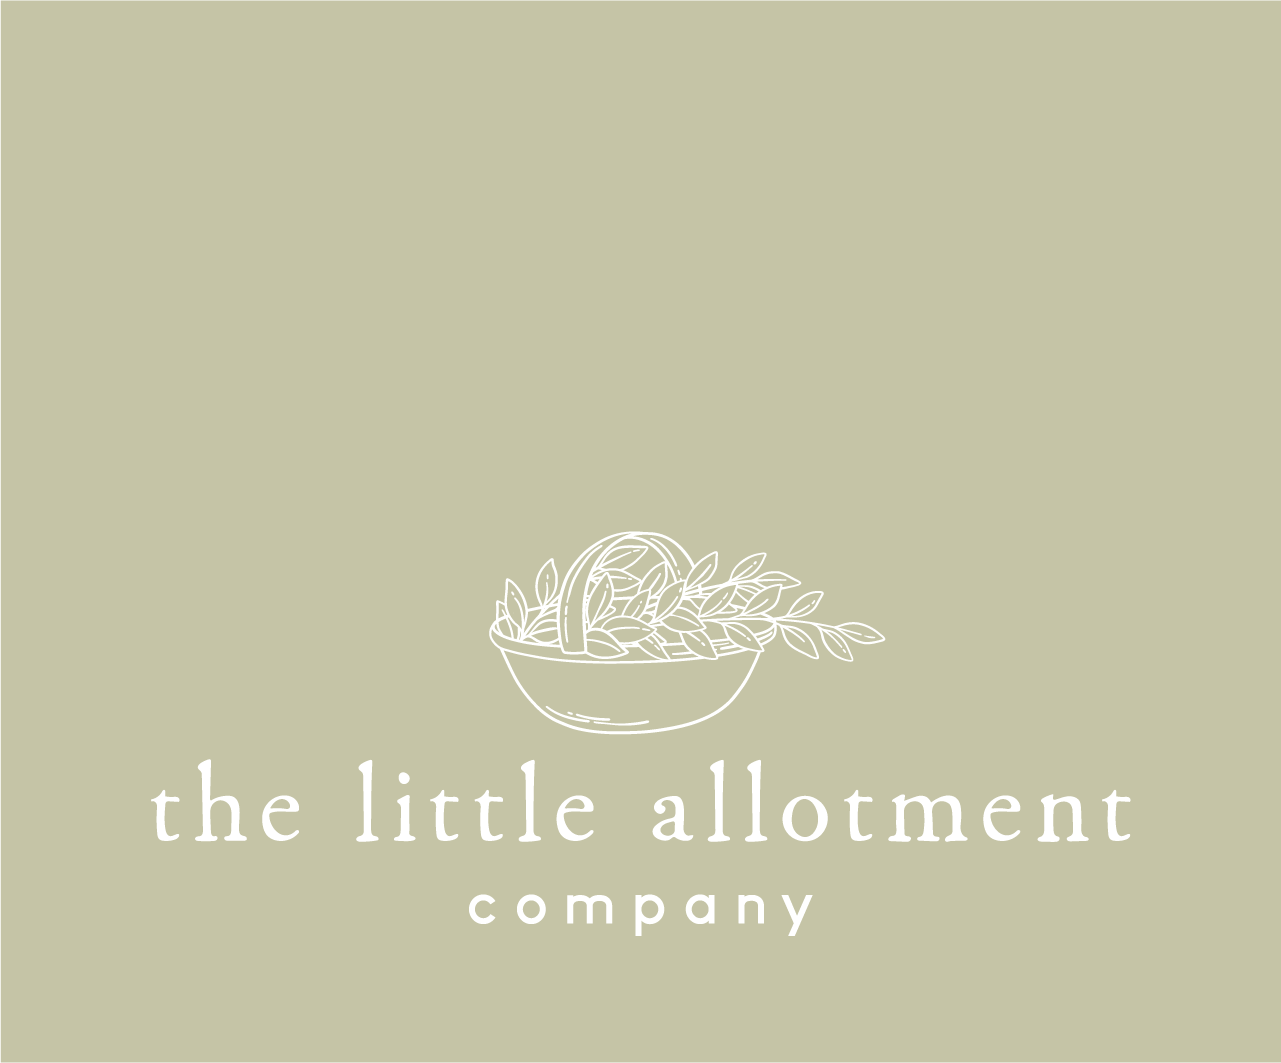 The Little Allotment Company